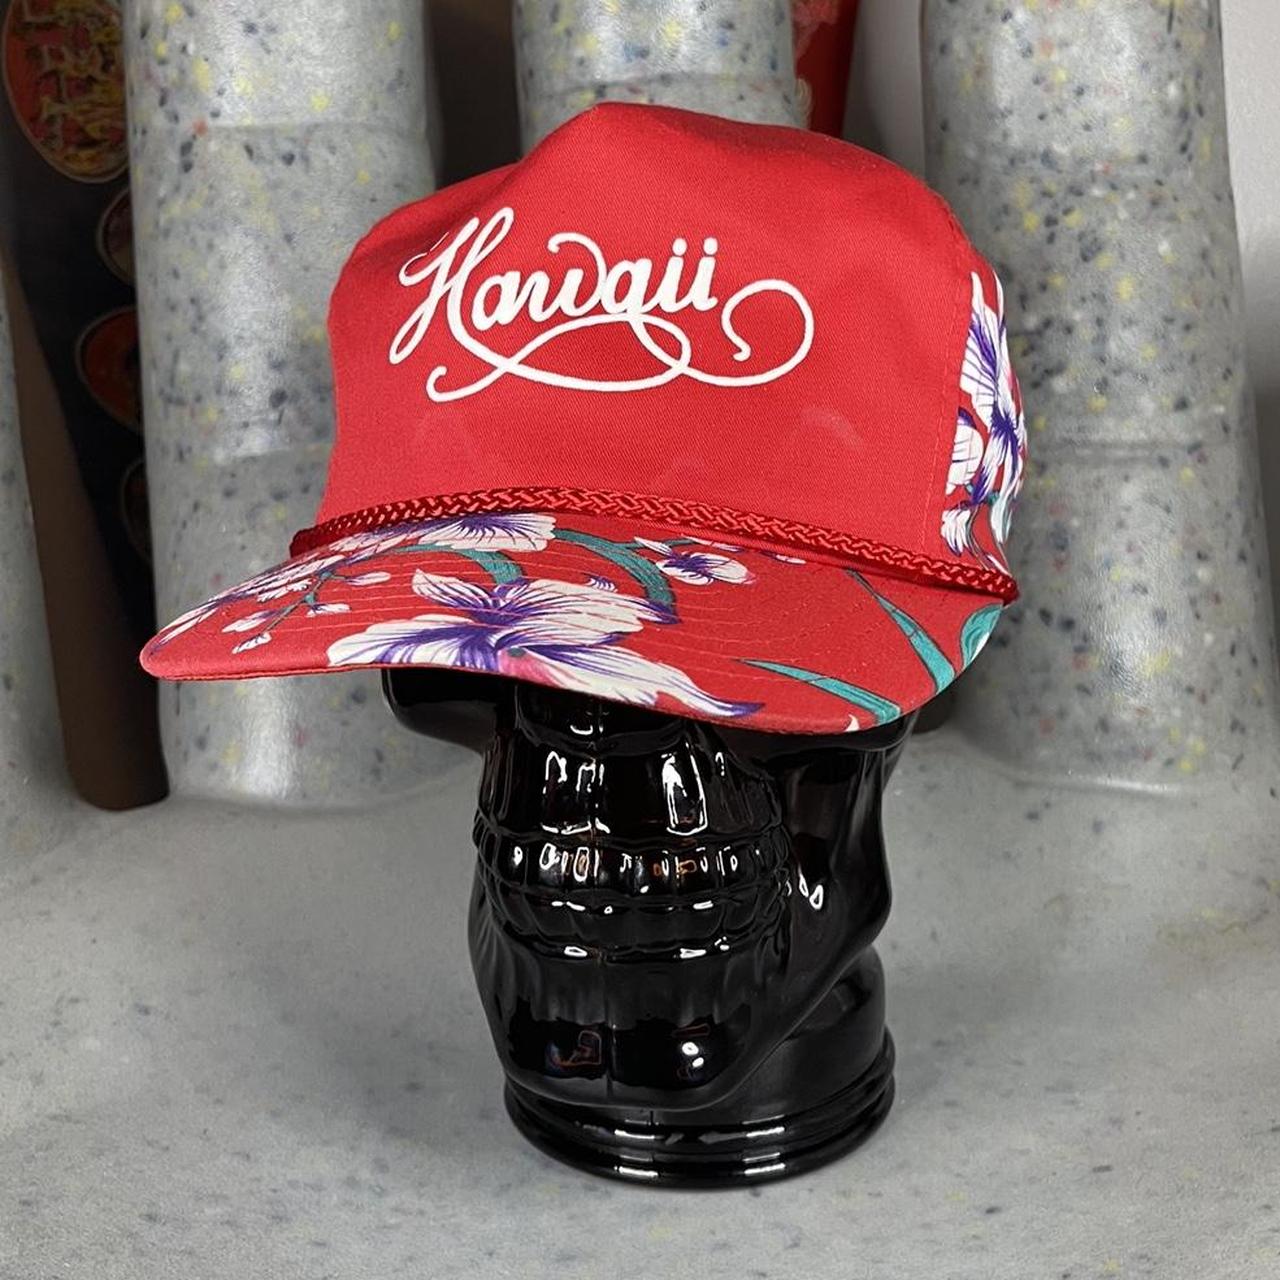 Product Image 1 - 1980s Hawaii Trucker Hat VINTAGE

Size/fitting: